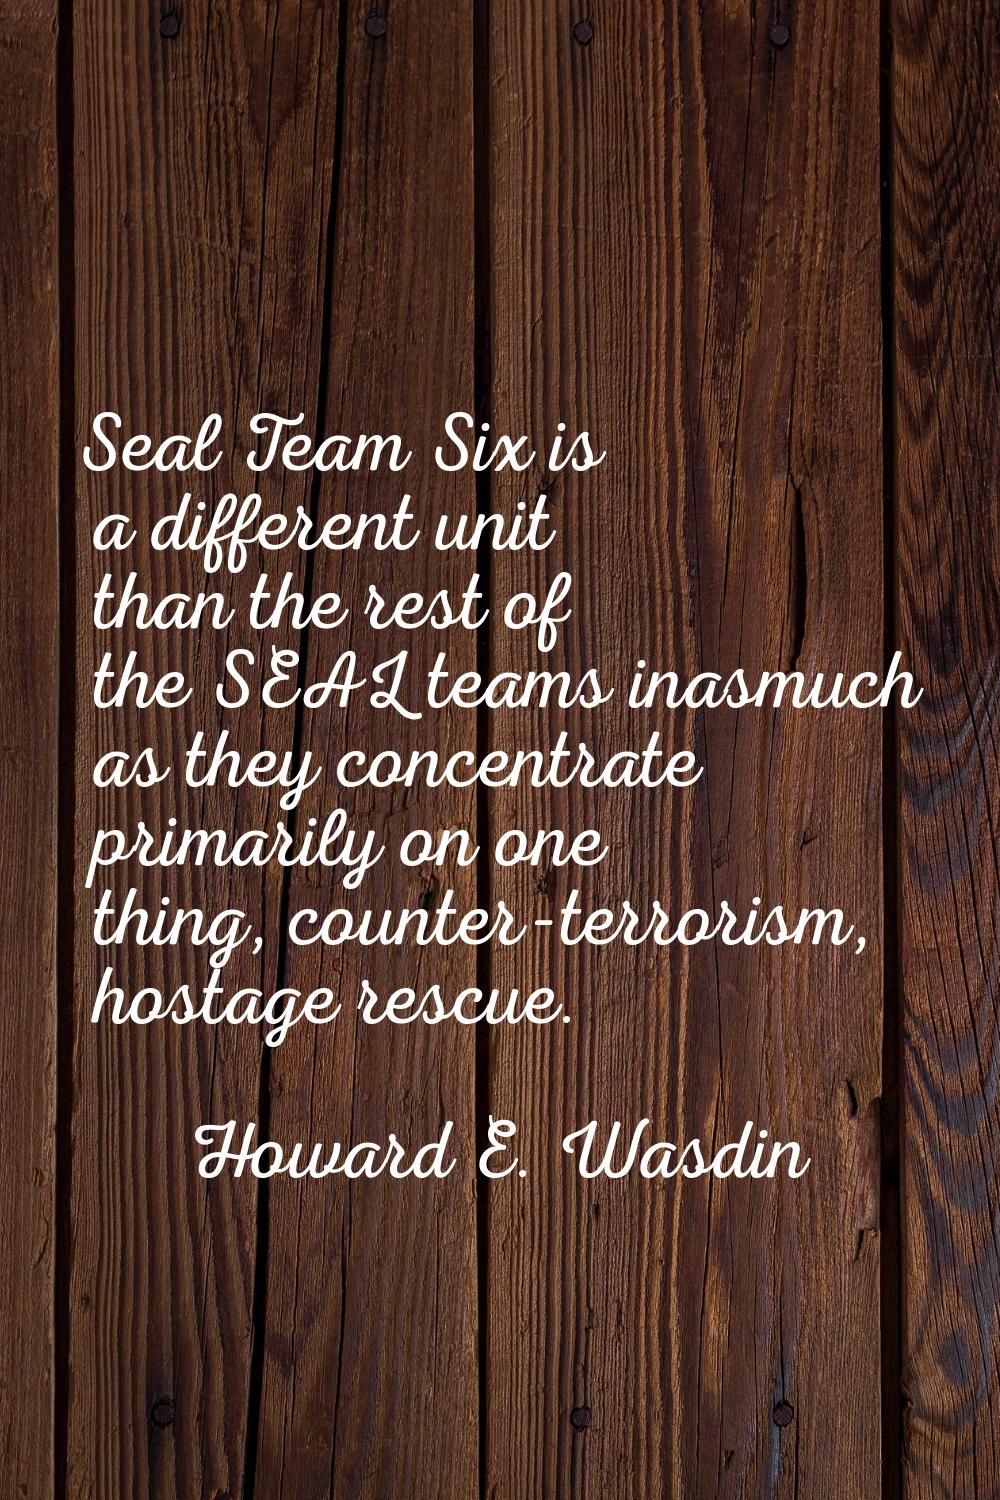 Seal Team Six is a different unit than the rest of the SEAL teams inasmuch as they concentrate prim